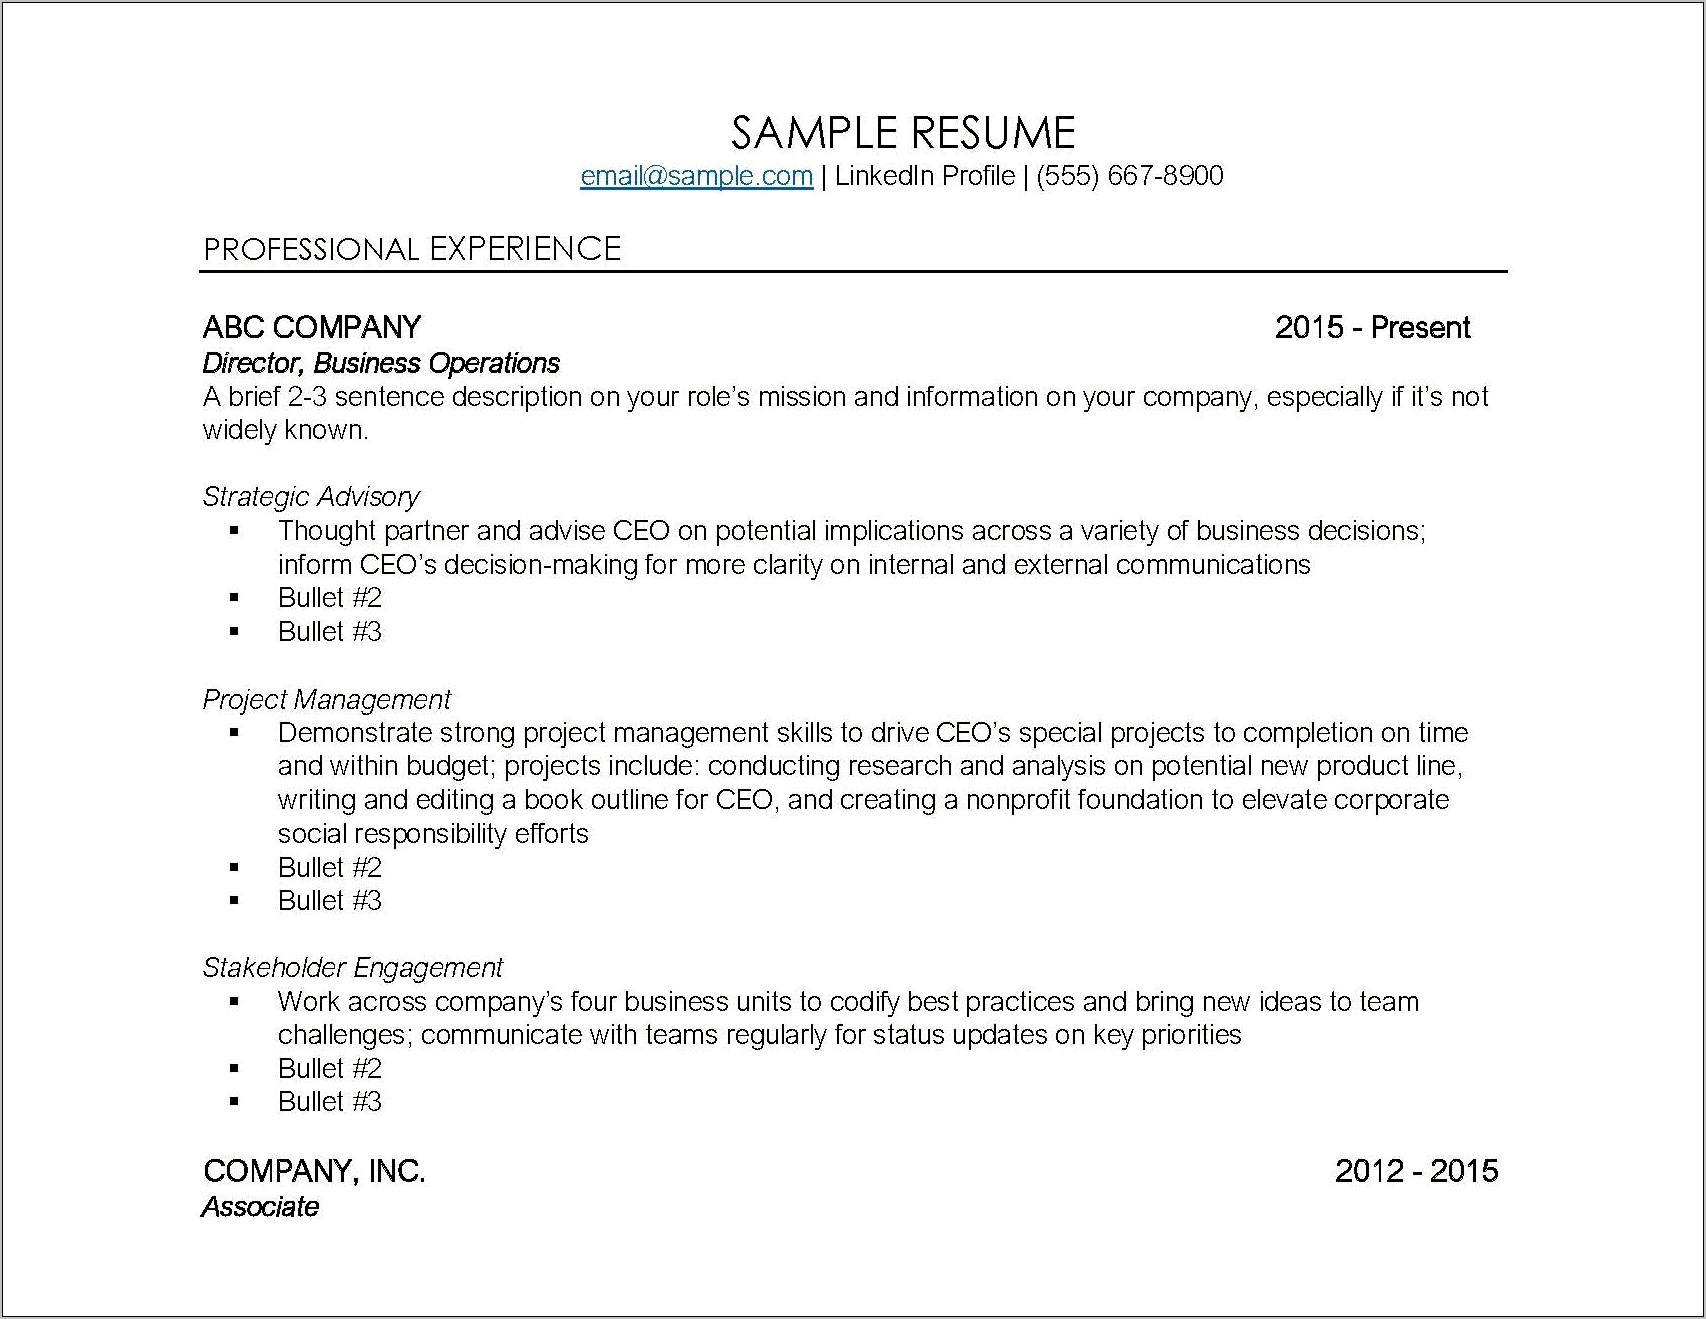 Best Summary Of Qualifications On Resume